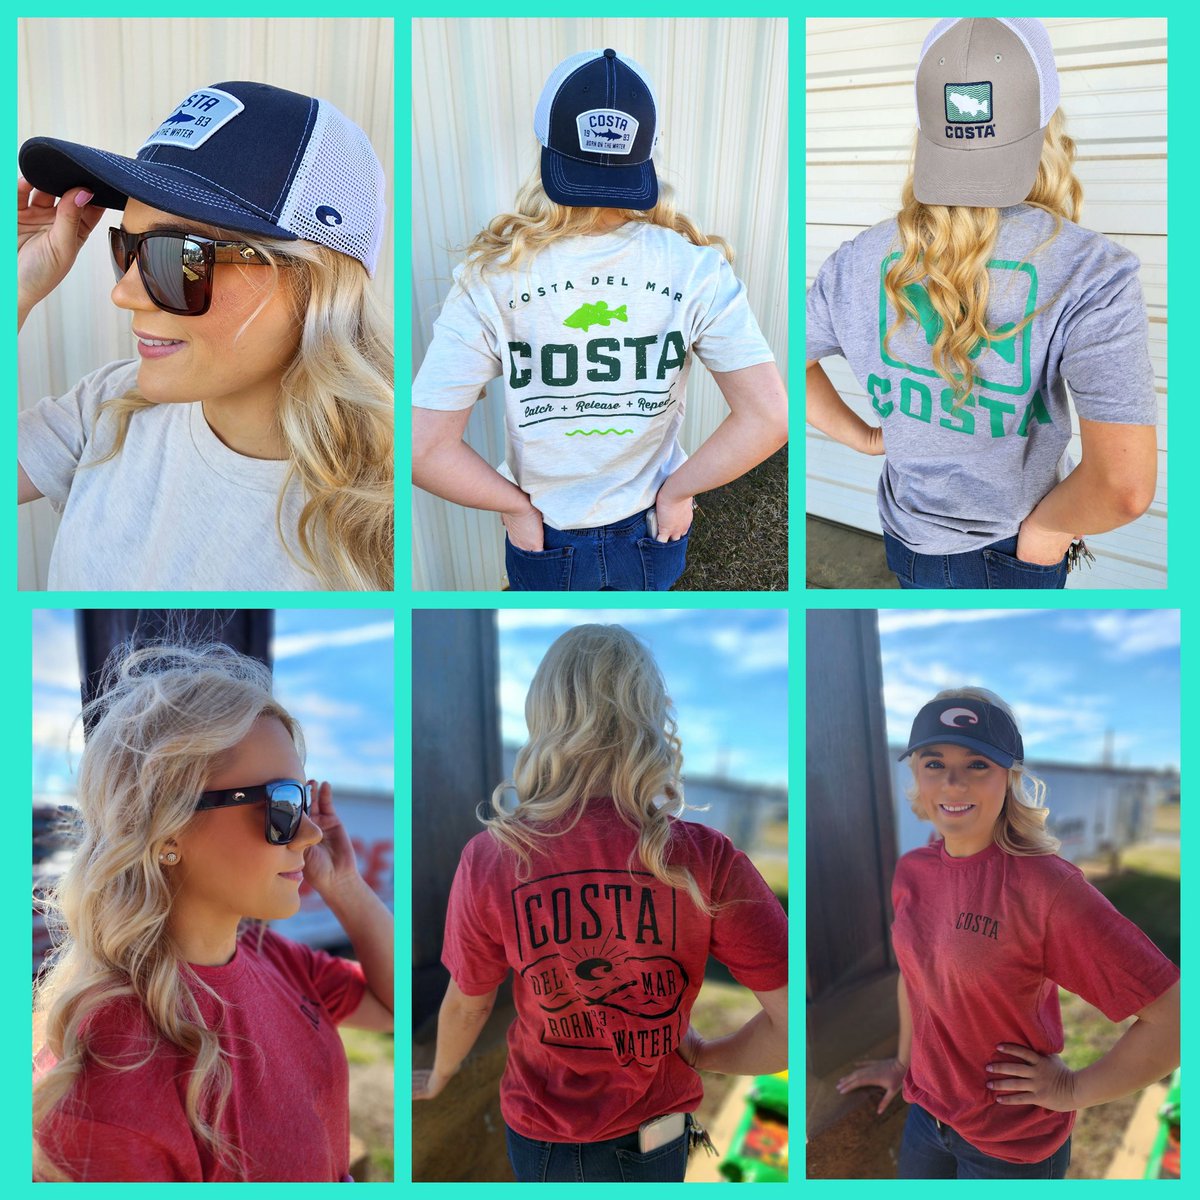 Costa is now in Honea Path! Shop sunglasses, tees, hats, or visors! Discover Life's Greatest Adventures with Costa on or off the water!
#acehoneapath #costa #costasunglasses